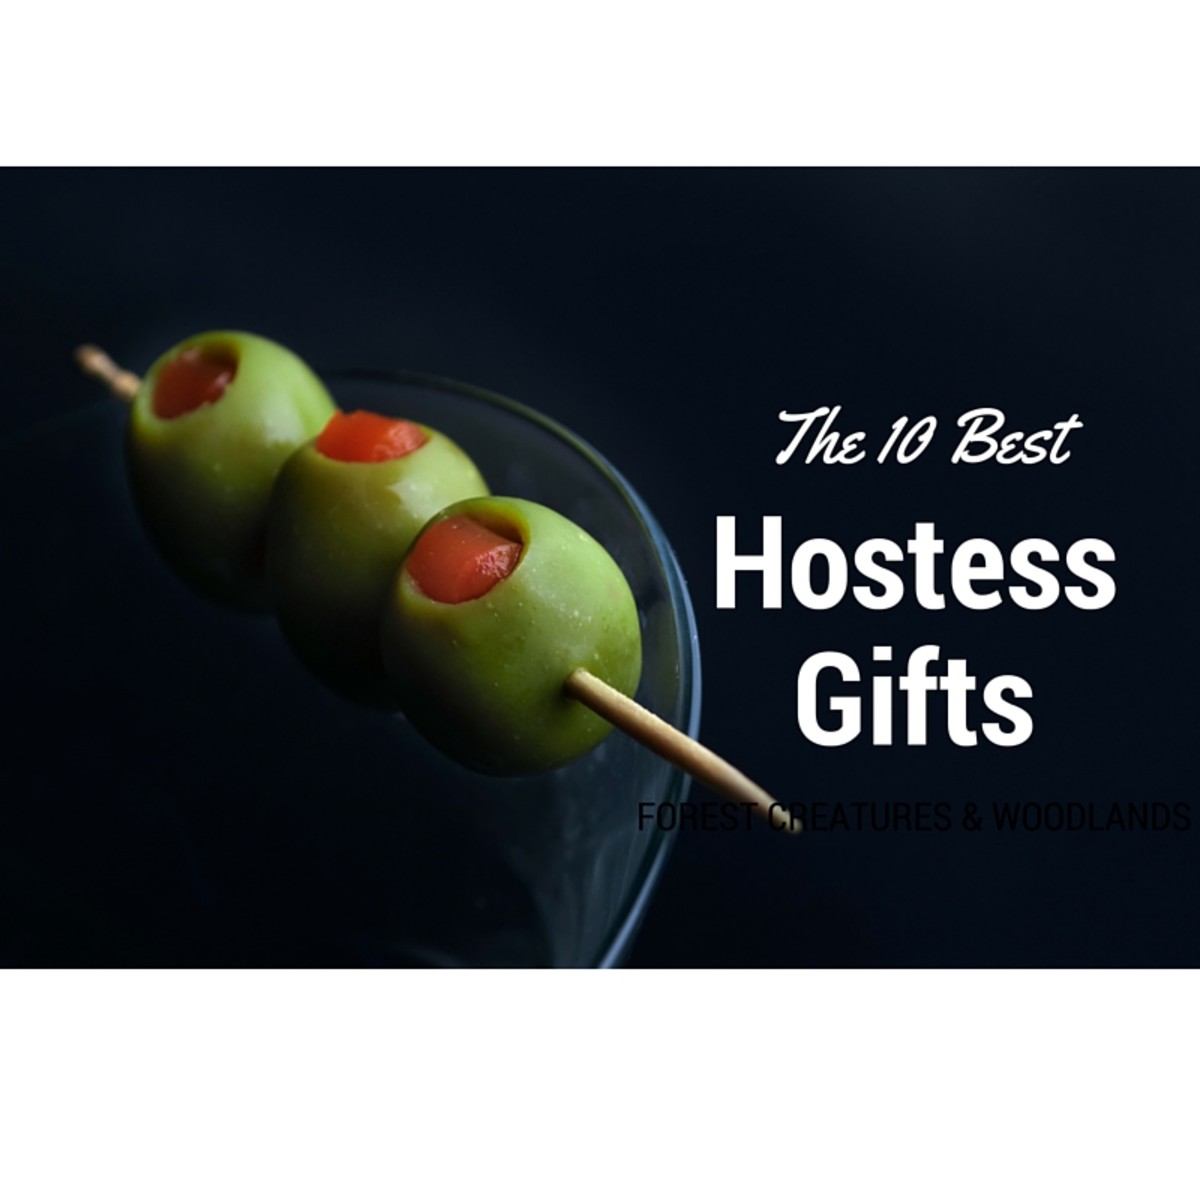 The 10 Best Hostess Gifts